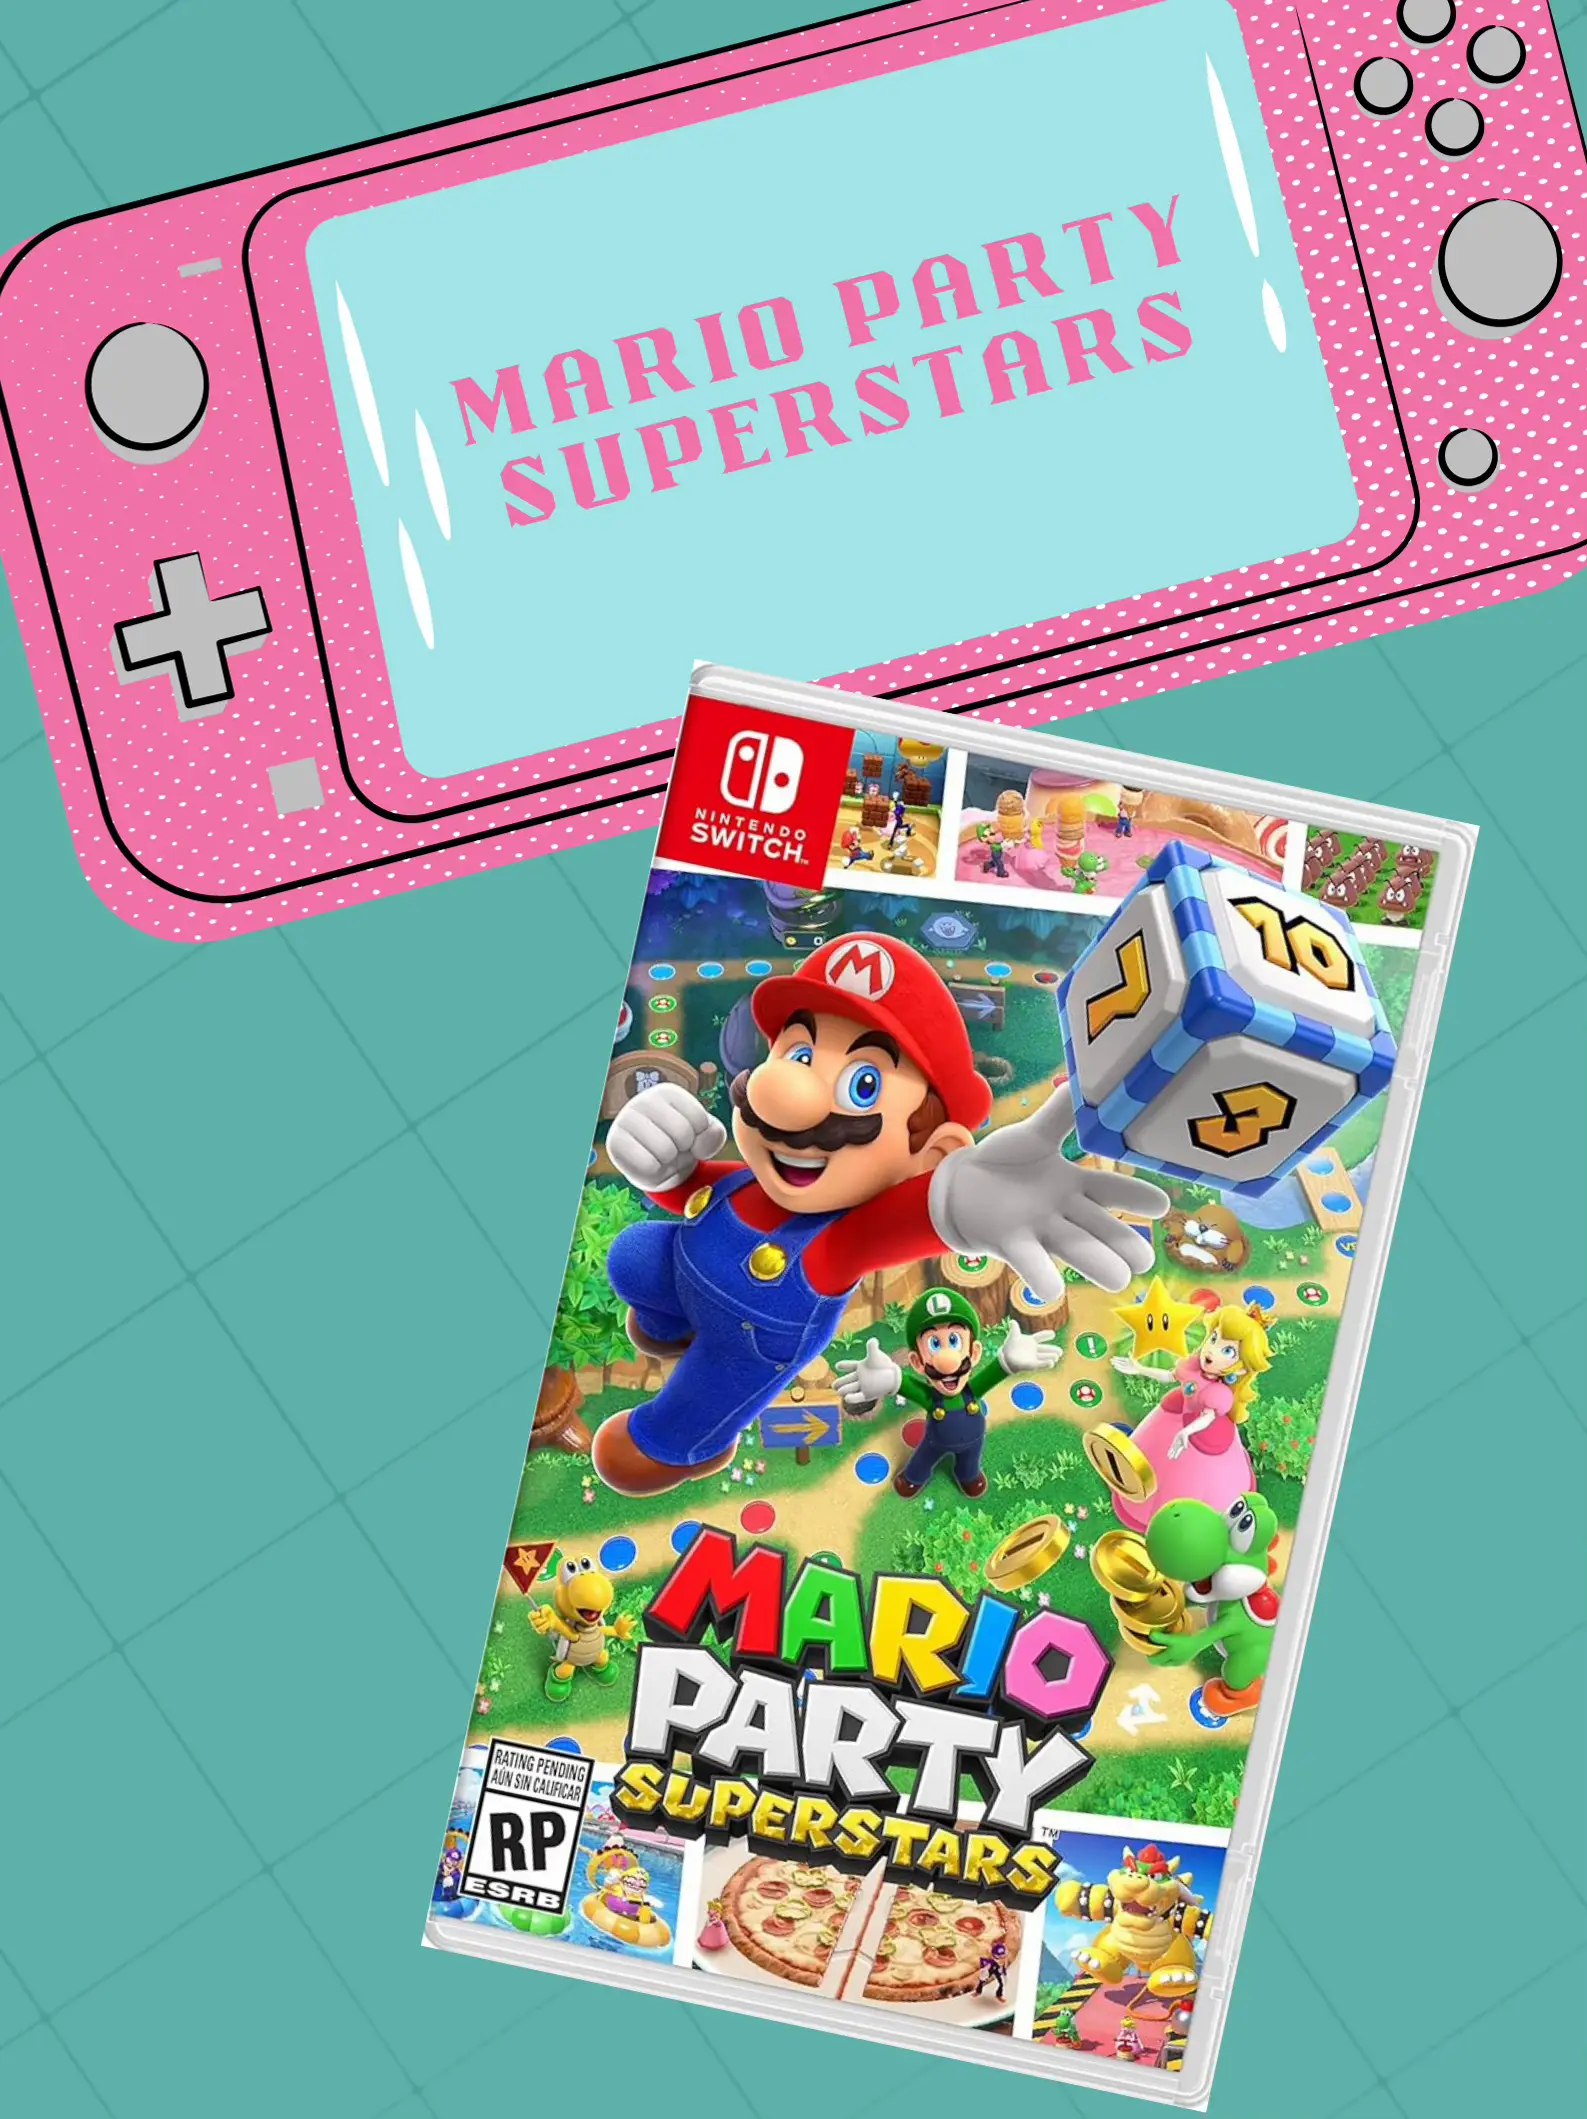 🎉 Mario Party Superstars gets the party started October 29th (Nintendo  Switch) 